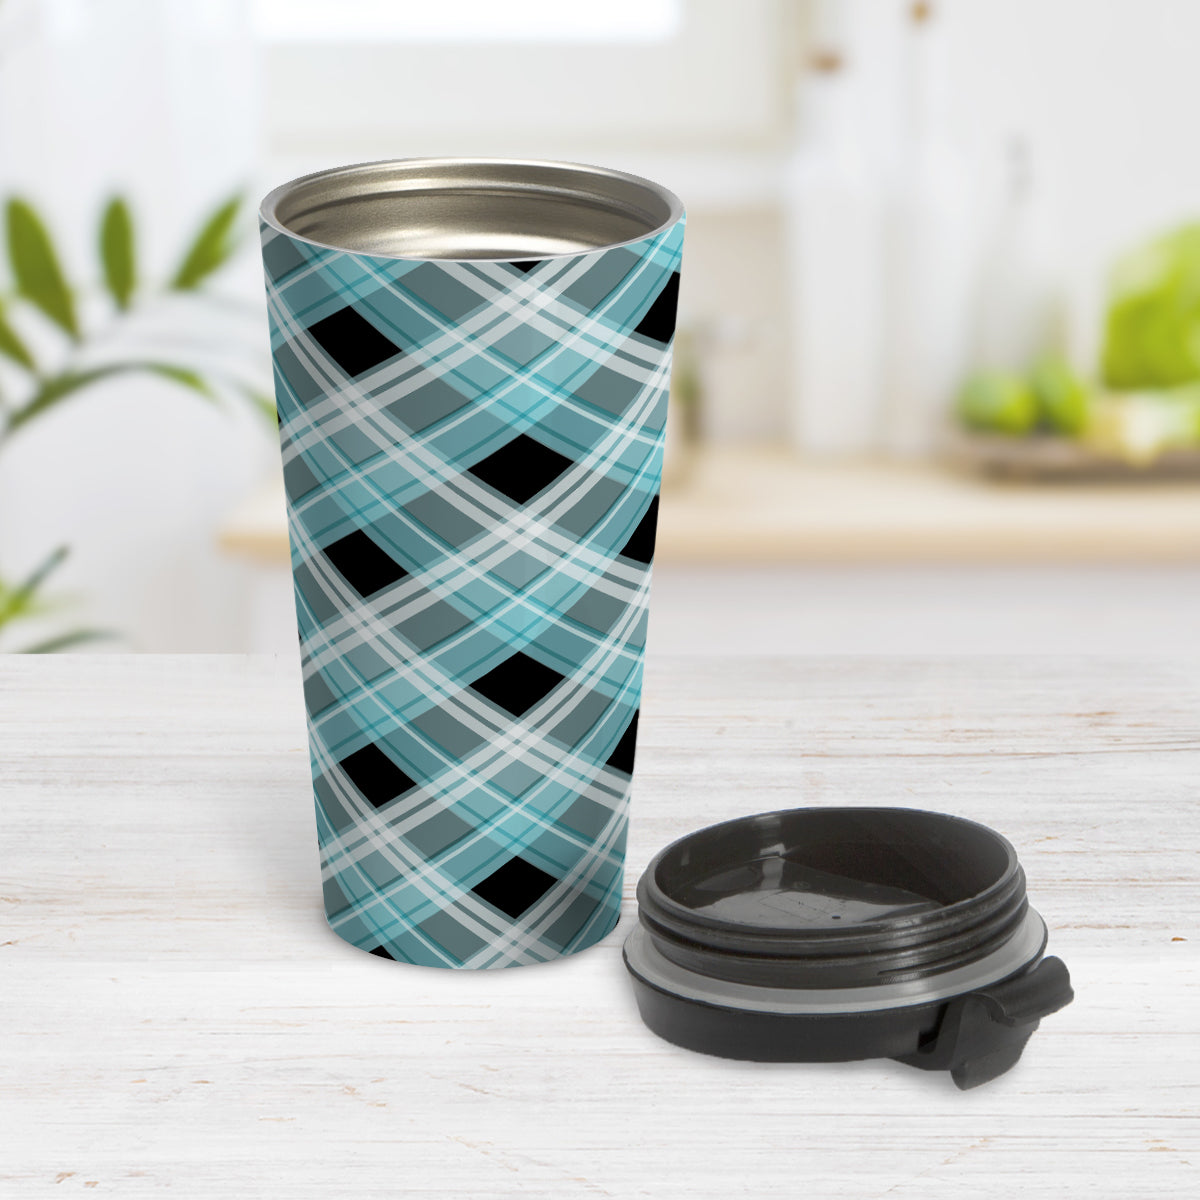 Alternative Turquoise Plaid Travel Mug (15oz) at Amy's Coffee Mugs. A stainless steel travel mug designed with a diagonal turquoise, black, and white plaid pattern that wraps around the mug. Designed for someone who likes plaid patterns and loves the color turquoise. Photo shows the mug open with the lid on the table beside it.